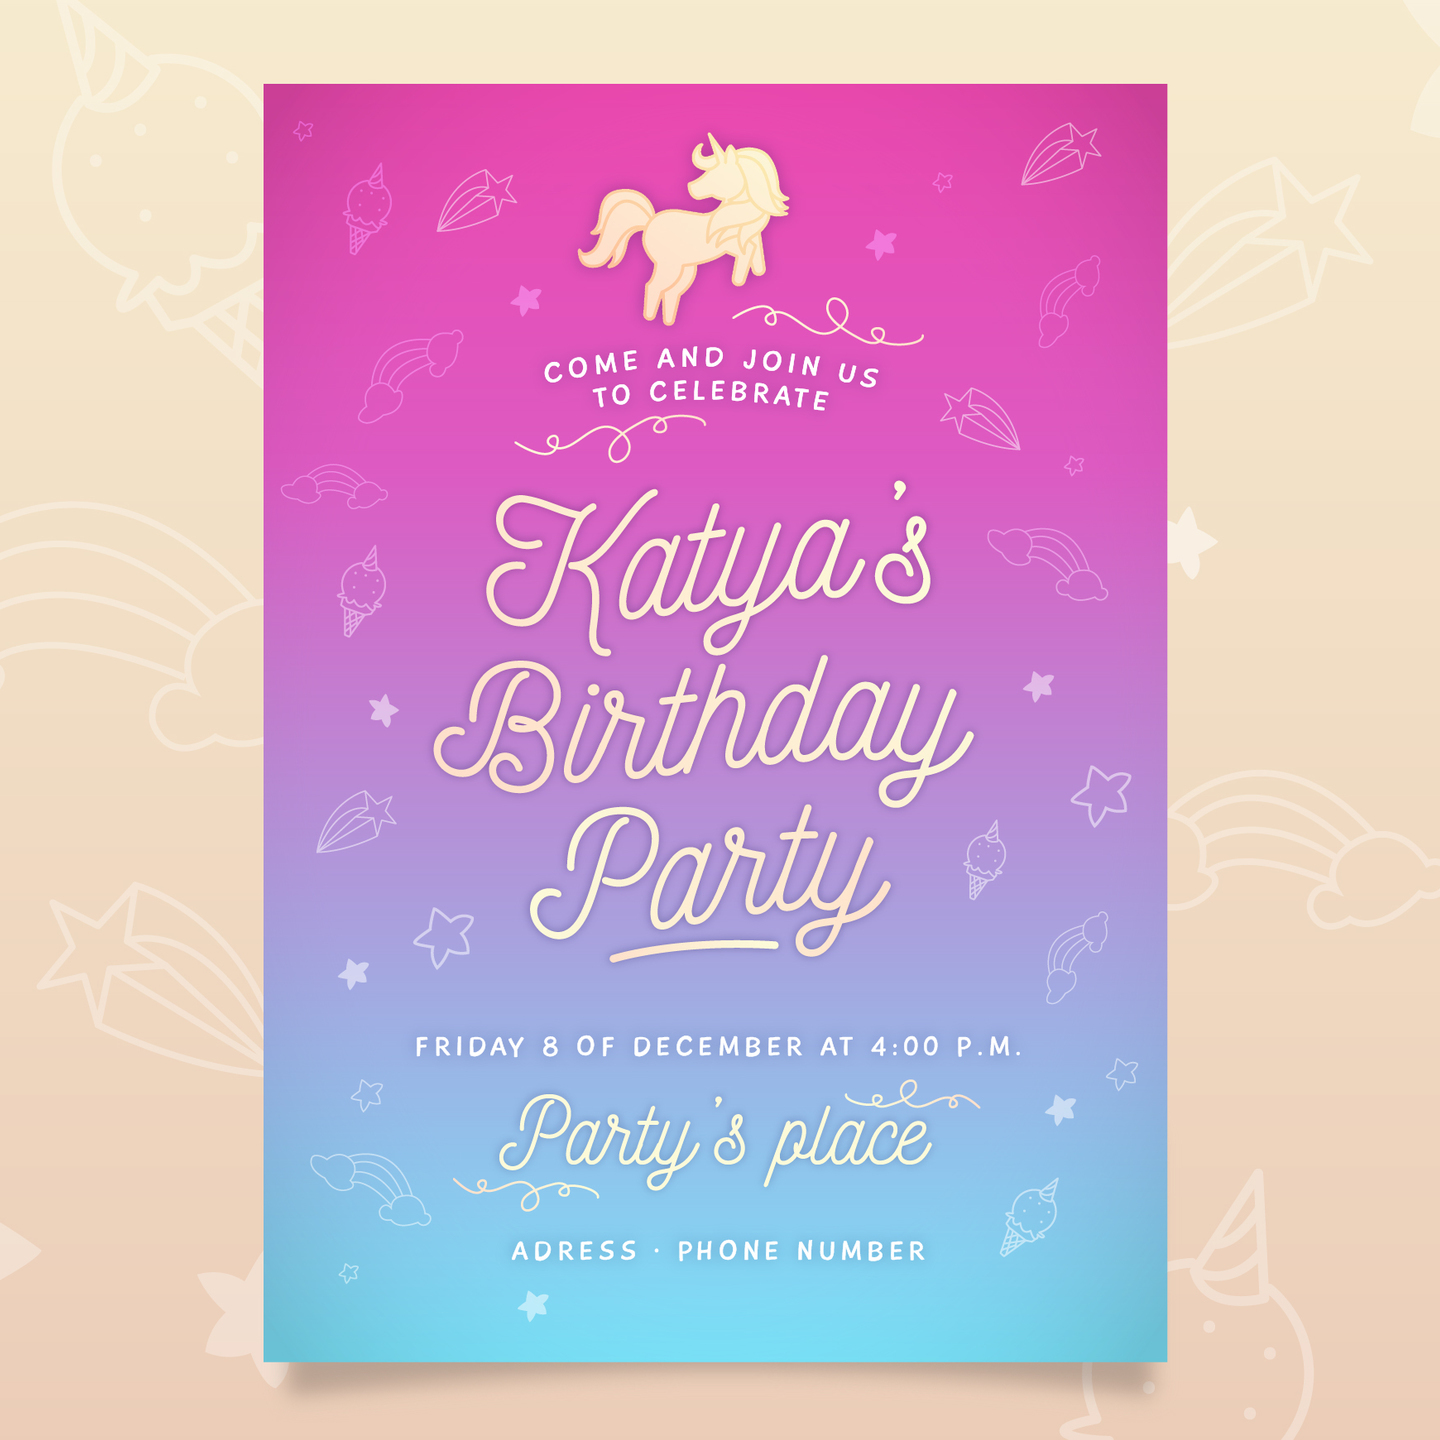 Easy to Manage Secondly, digital birthday invitations are easy to create, send to guests and track RSVPs. The process can be done in minutes, and with the excellent nature of a mobile app, any information or changes made for the event can be constantly shared between the host and guest